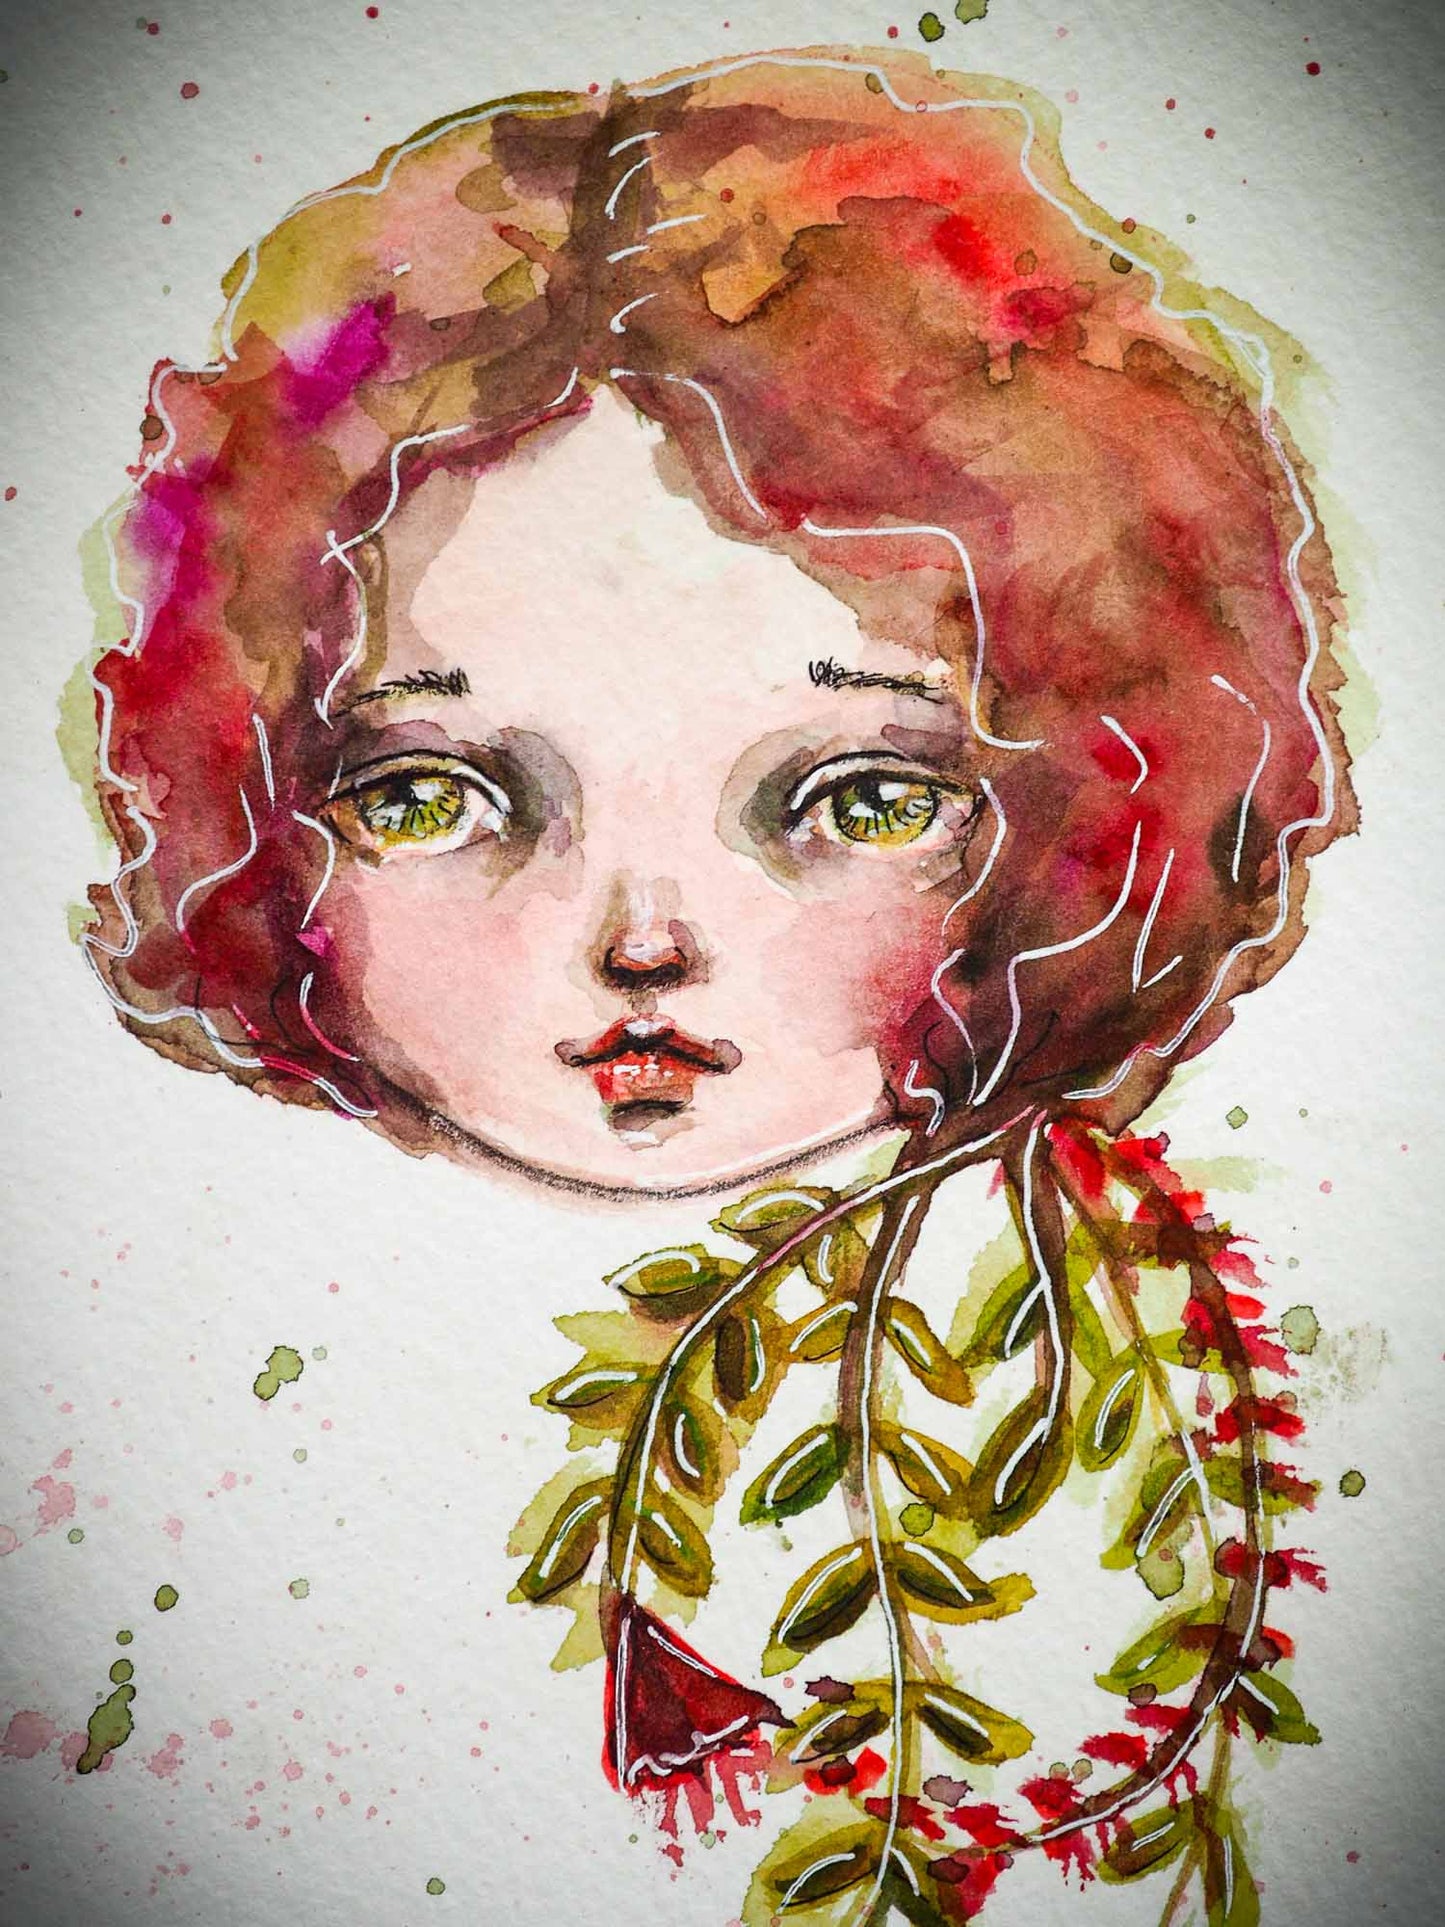 Watercolor on paper original painting by Danita Art. A blooming rose has the face of a green eyed girl as she open her hair petals and hair.